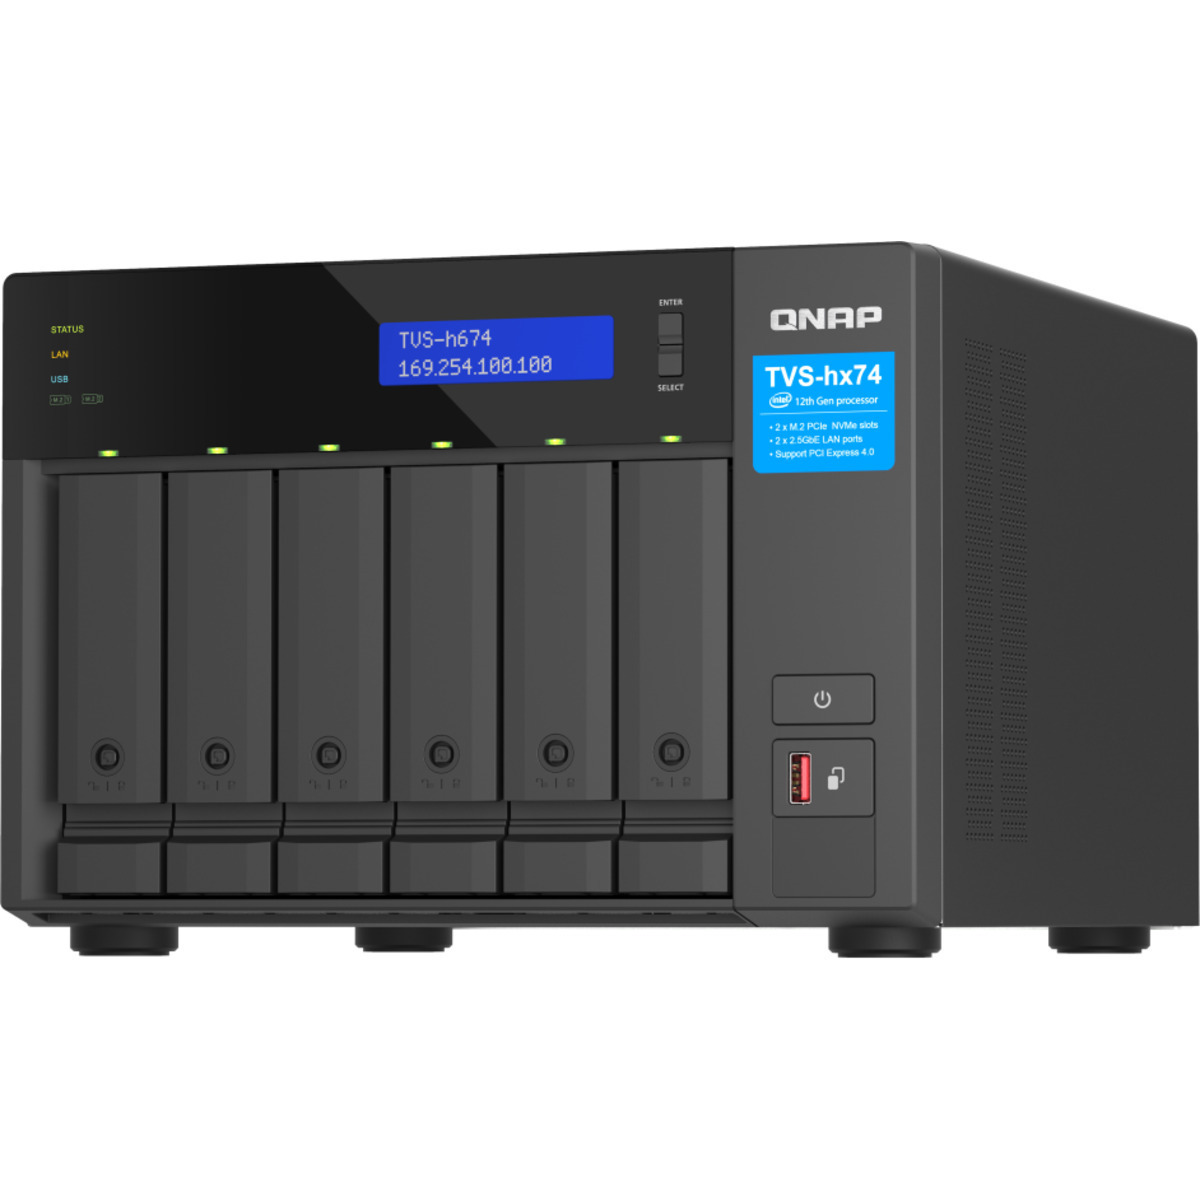 QNAP TVS-h674 Core i3 84tb 6-Bay Desktop Multimedia / Power User / Business NAS - Network Attached Storage Device 6x14tb Seagate IronWolf Pro ST14000NT001 3.5 7200rpm SATA 6Gb/s HDD NAS Class Drives Installed - Burn-In Tested TVS-h674 Core i3